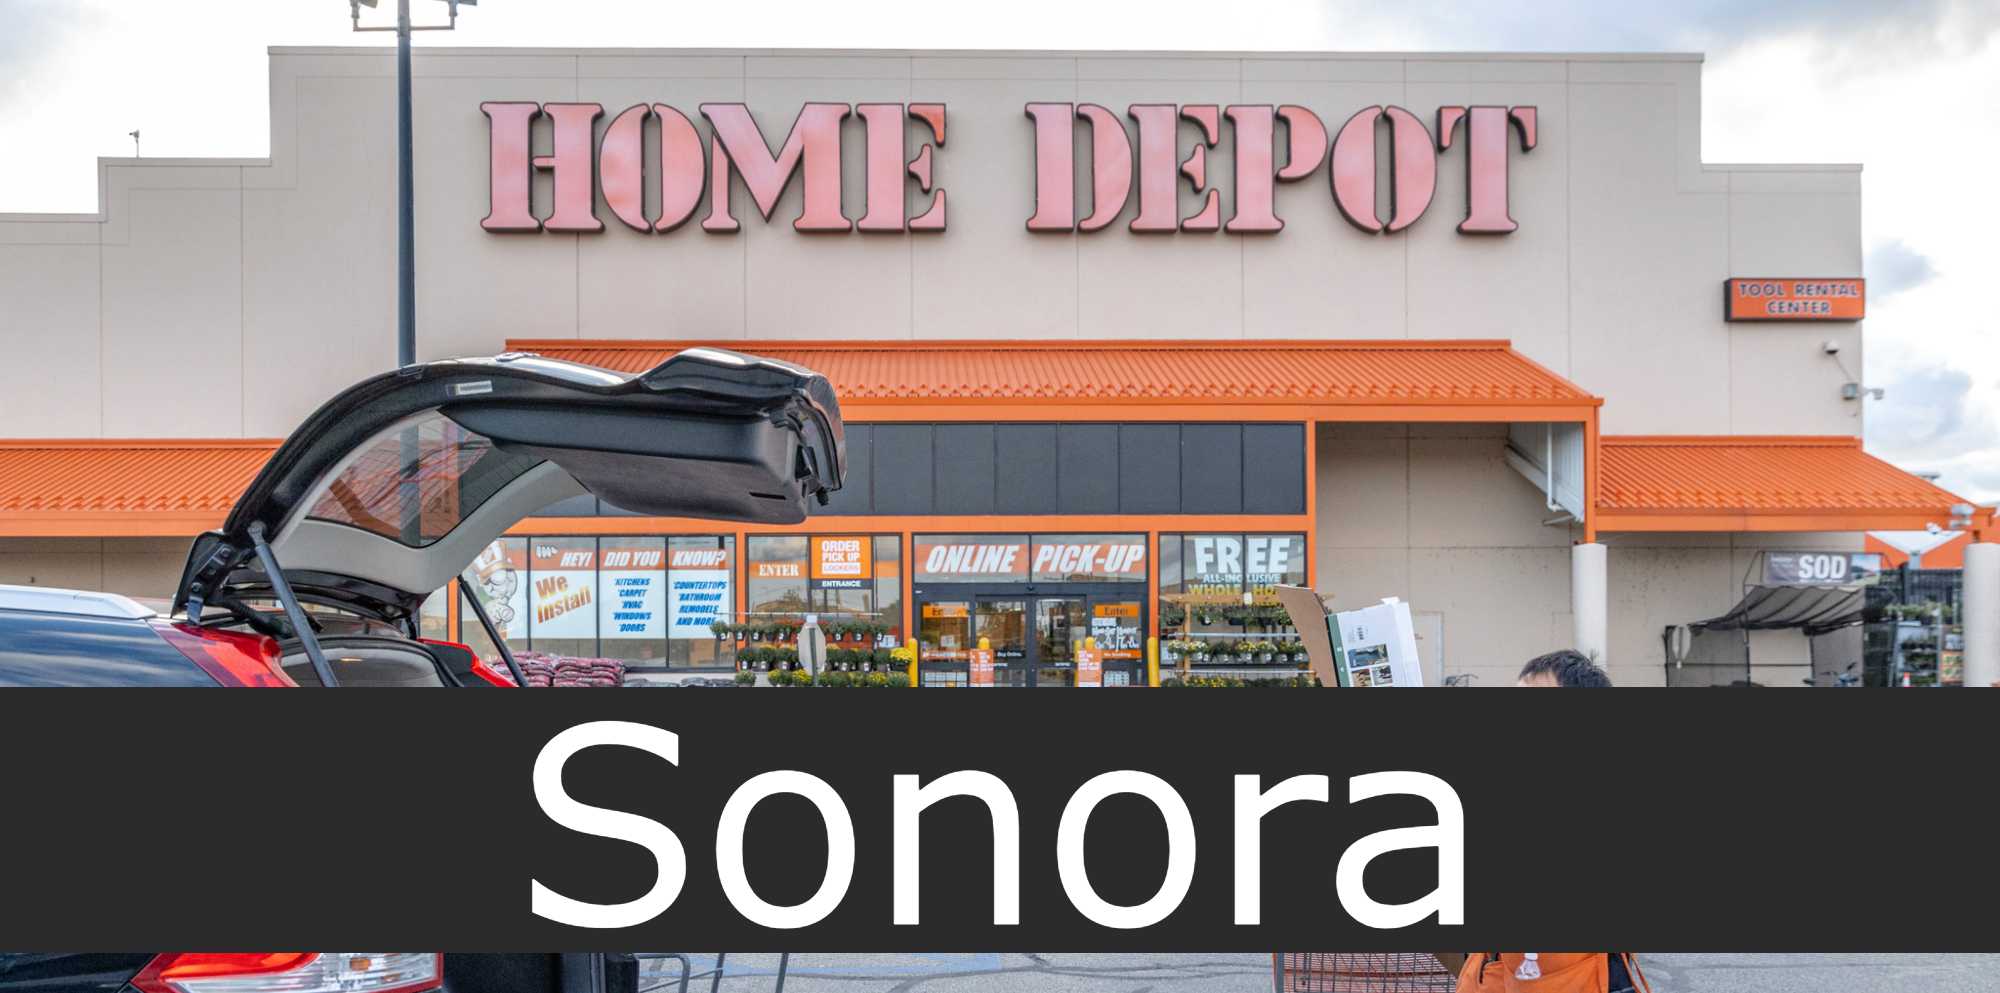 home depot Sonora